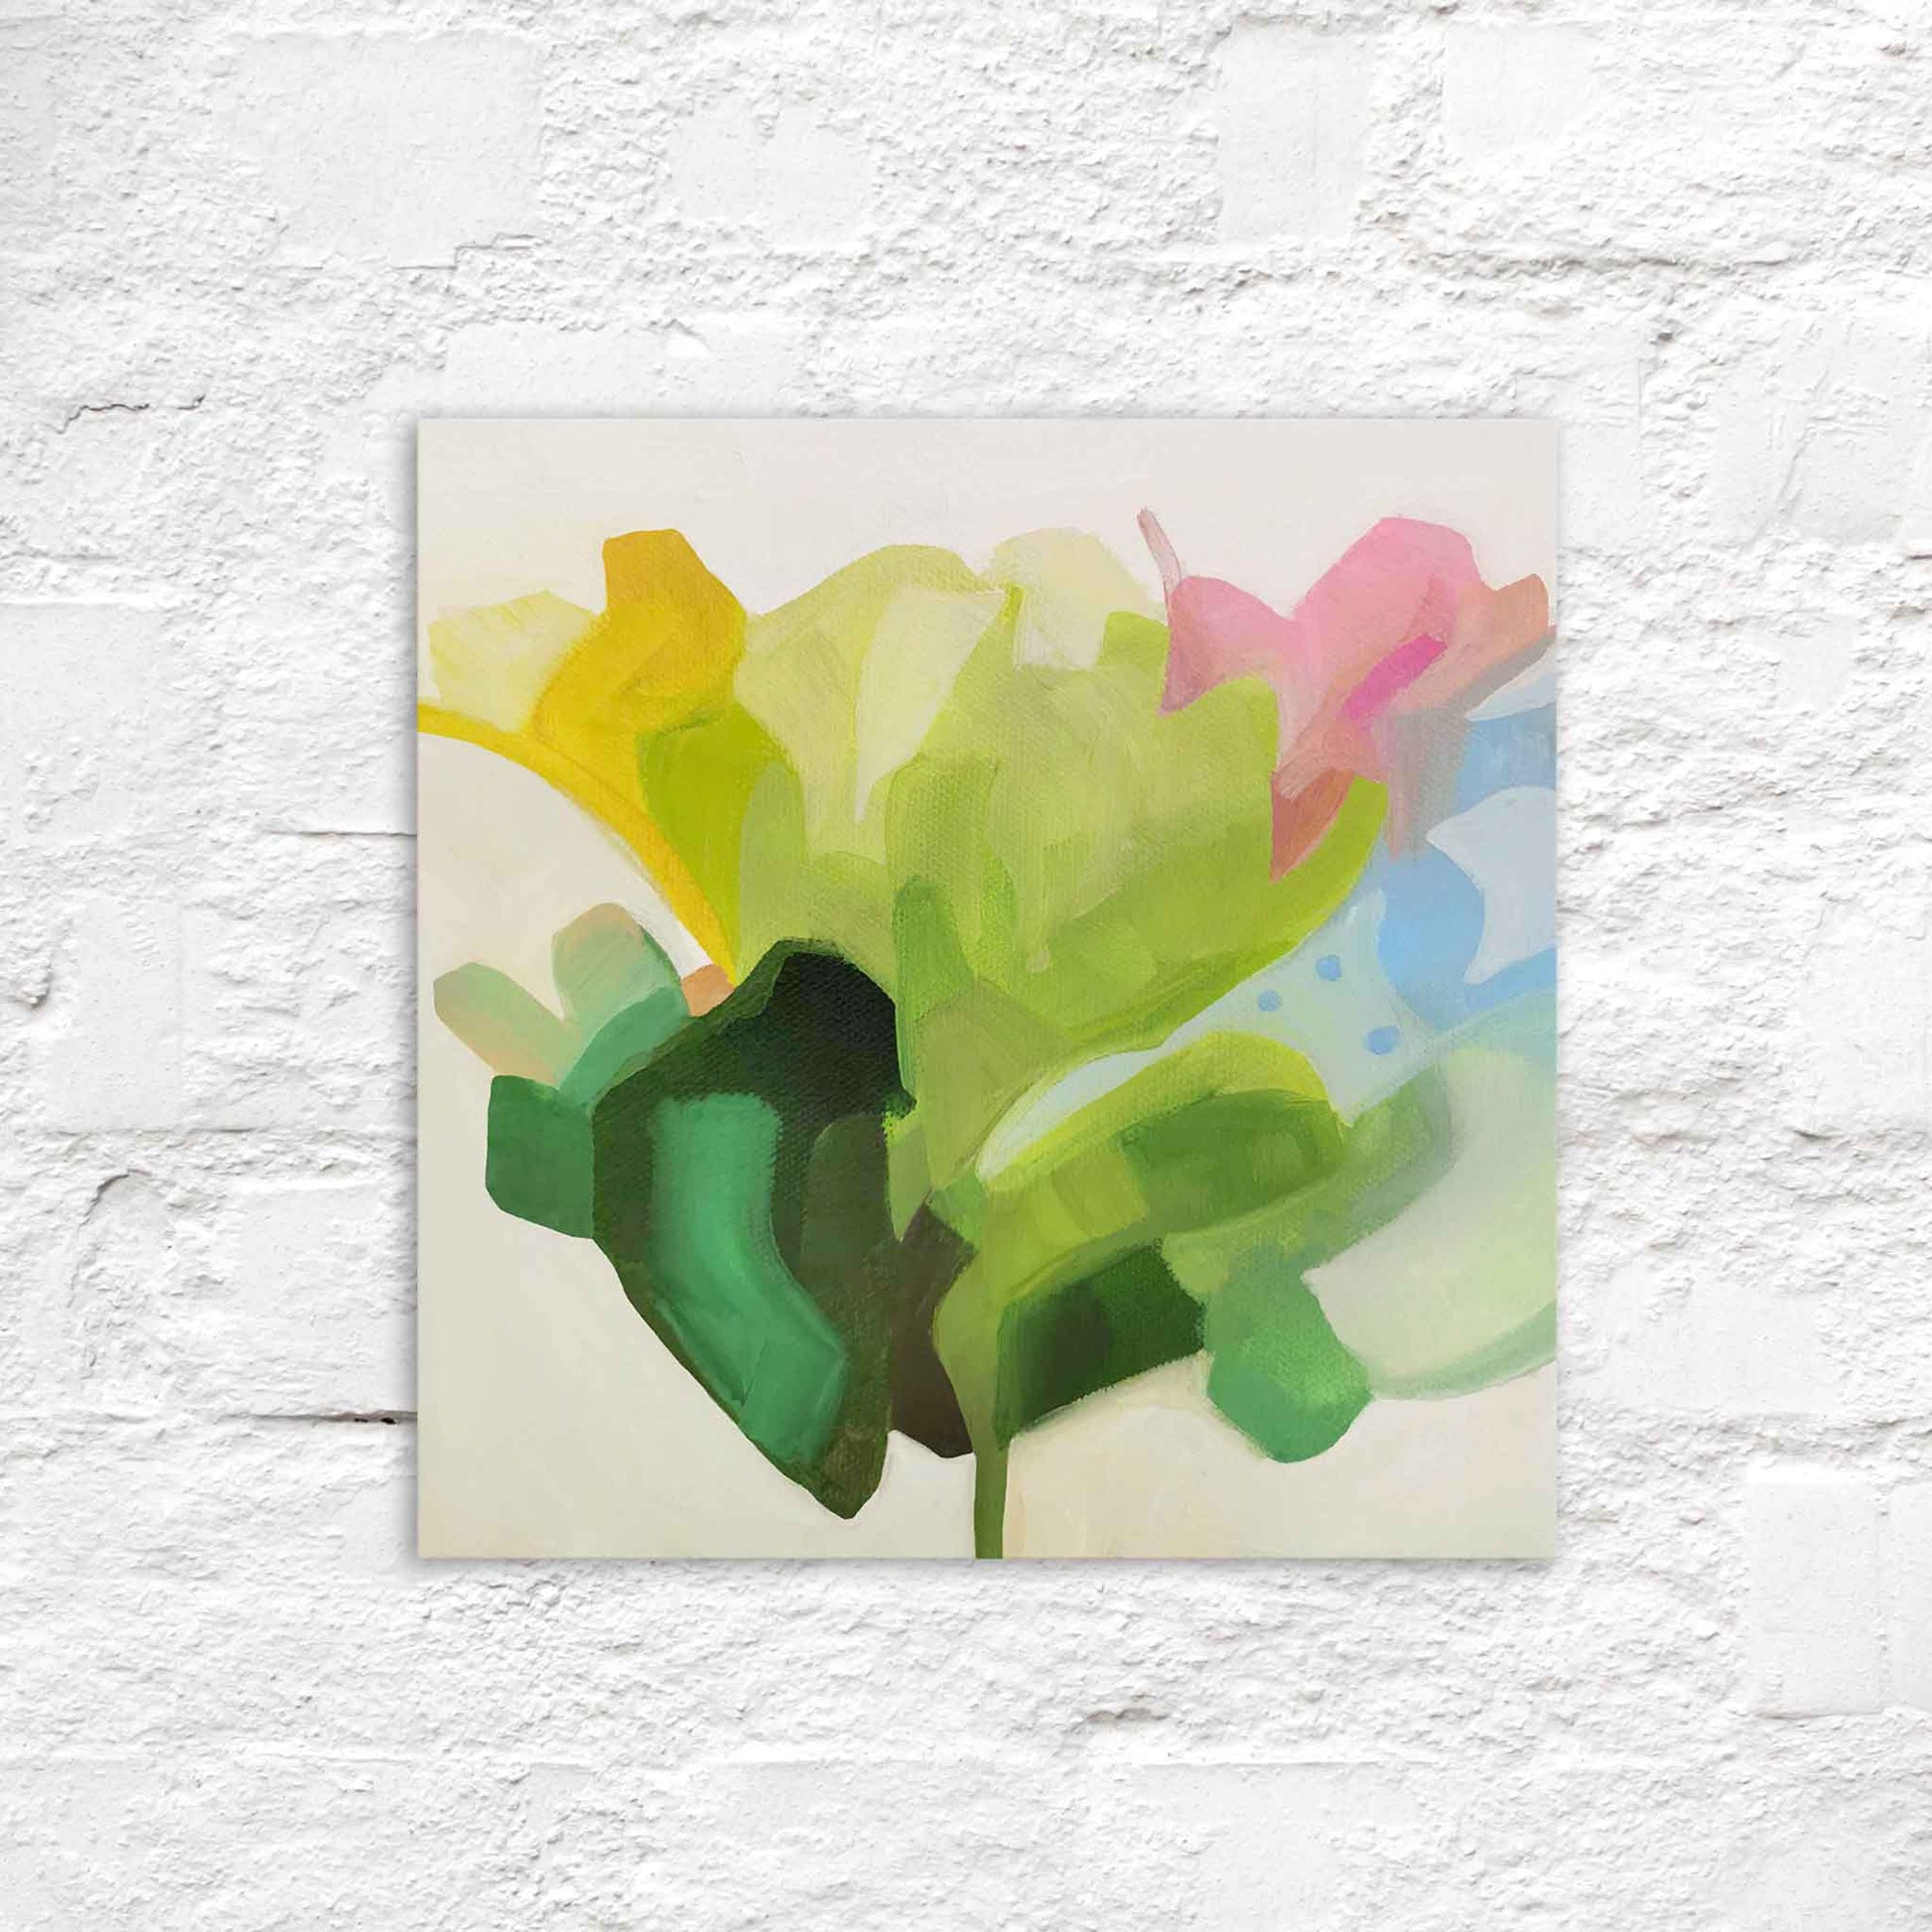 small square abstract oil painting on canvas in fresh green dark green pink and light blue